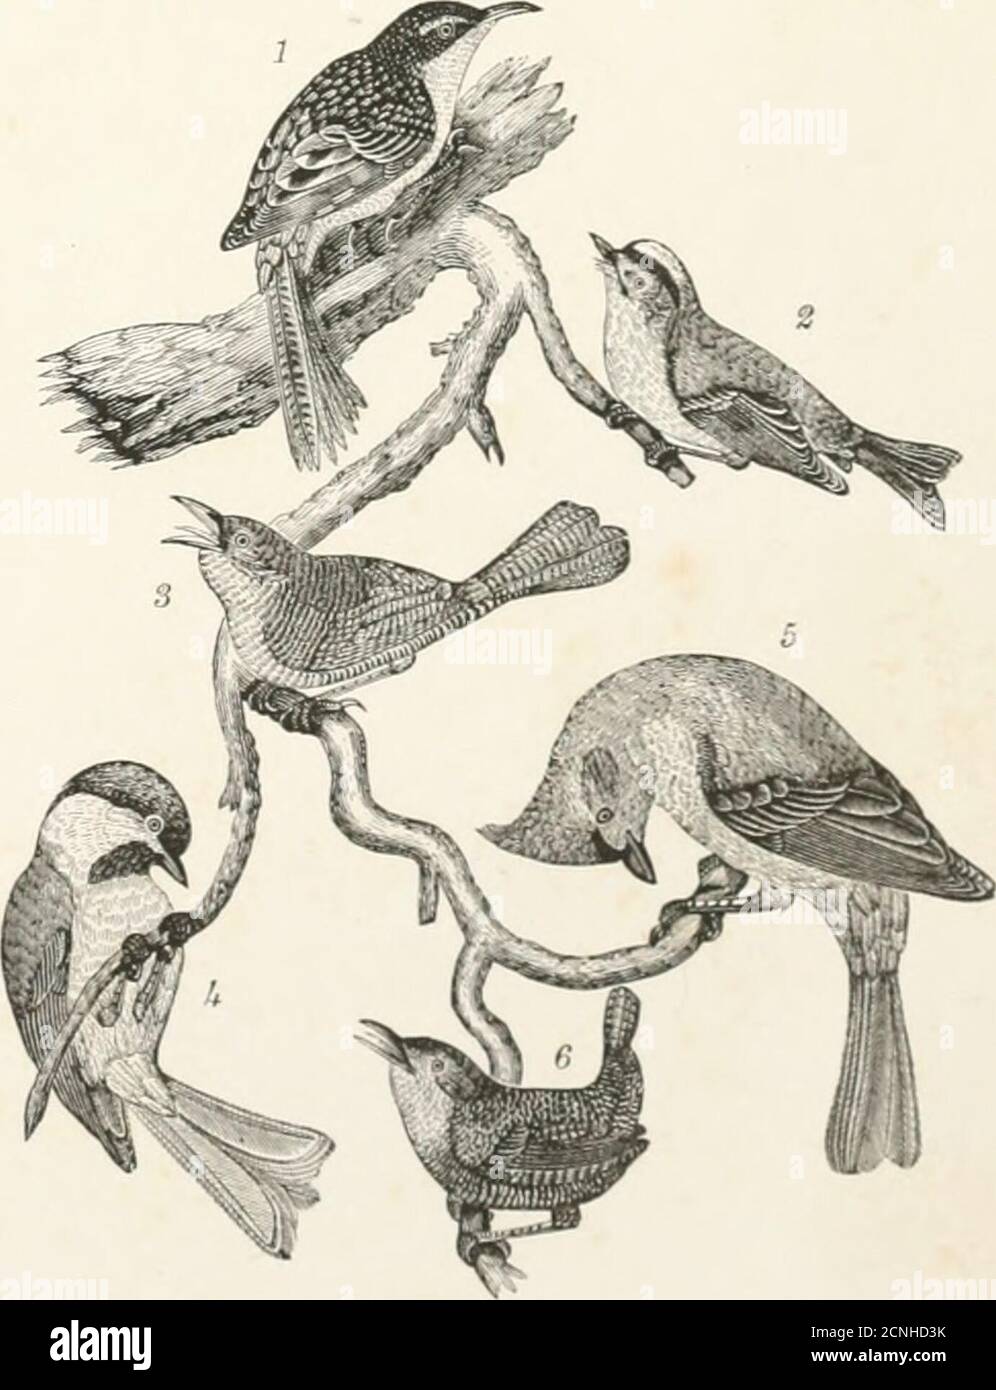 . American ornithology, or, The natural history of the birds of the United States : illustrated with plates engraved from drawings from nature . Platk 7.—1. (^edar-lilni. J. Red-bellied Woodpecker. 3, 1latk 8.—1. Hinwn rreiper. 2. »i olden-crested Wren. 3. Yellow-throated Ilycalcher. 4. Purple Finch. House Wren. 4. lilack-cupped Titmouse. 5. Crested Titmouse. 6. Winter Wren. Stock Photo